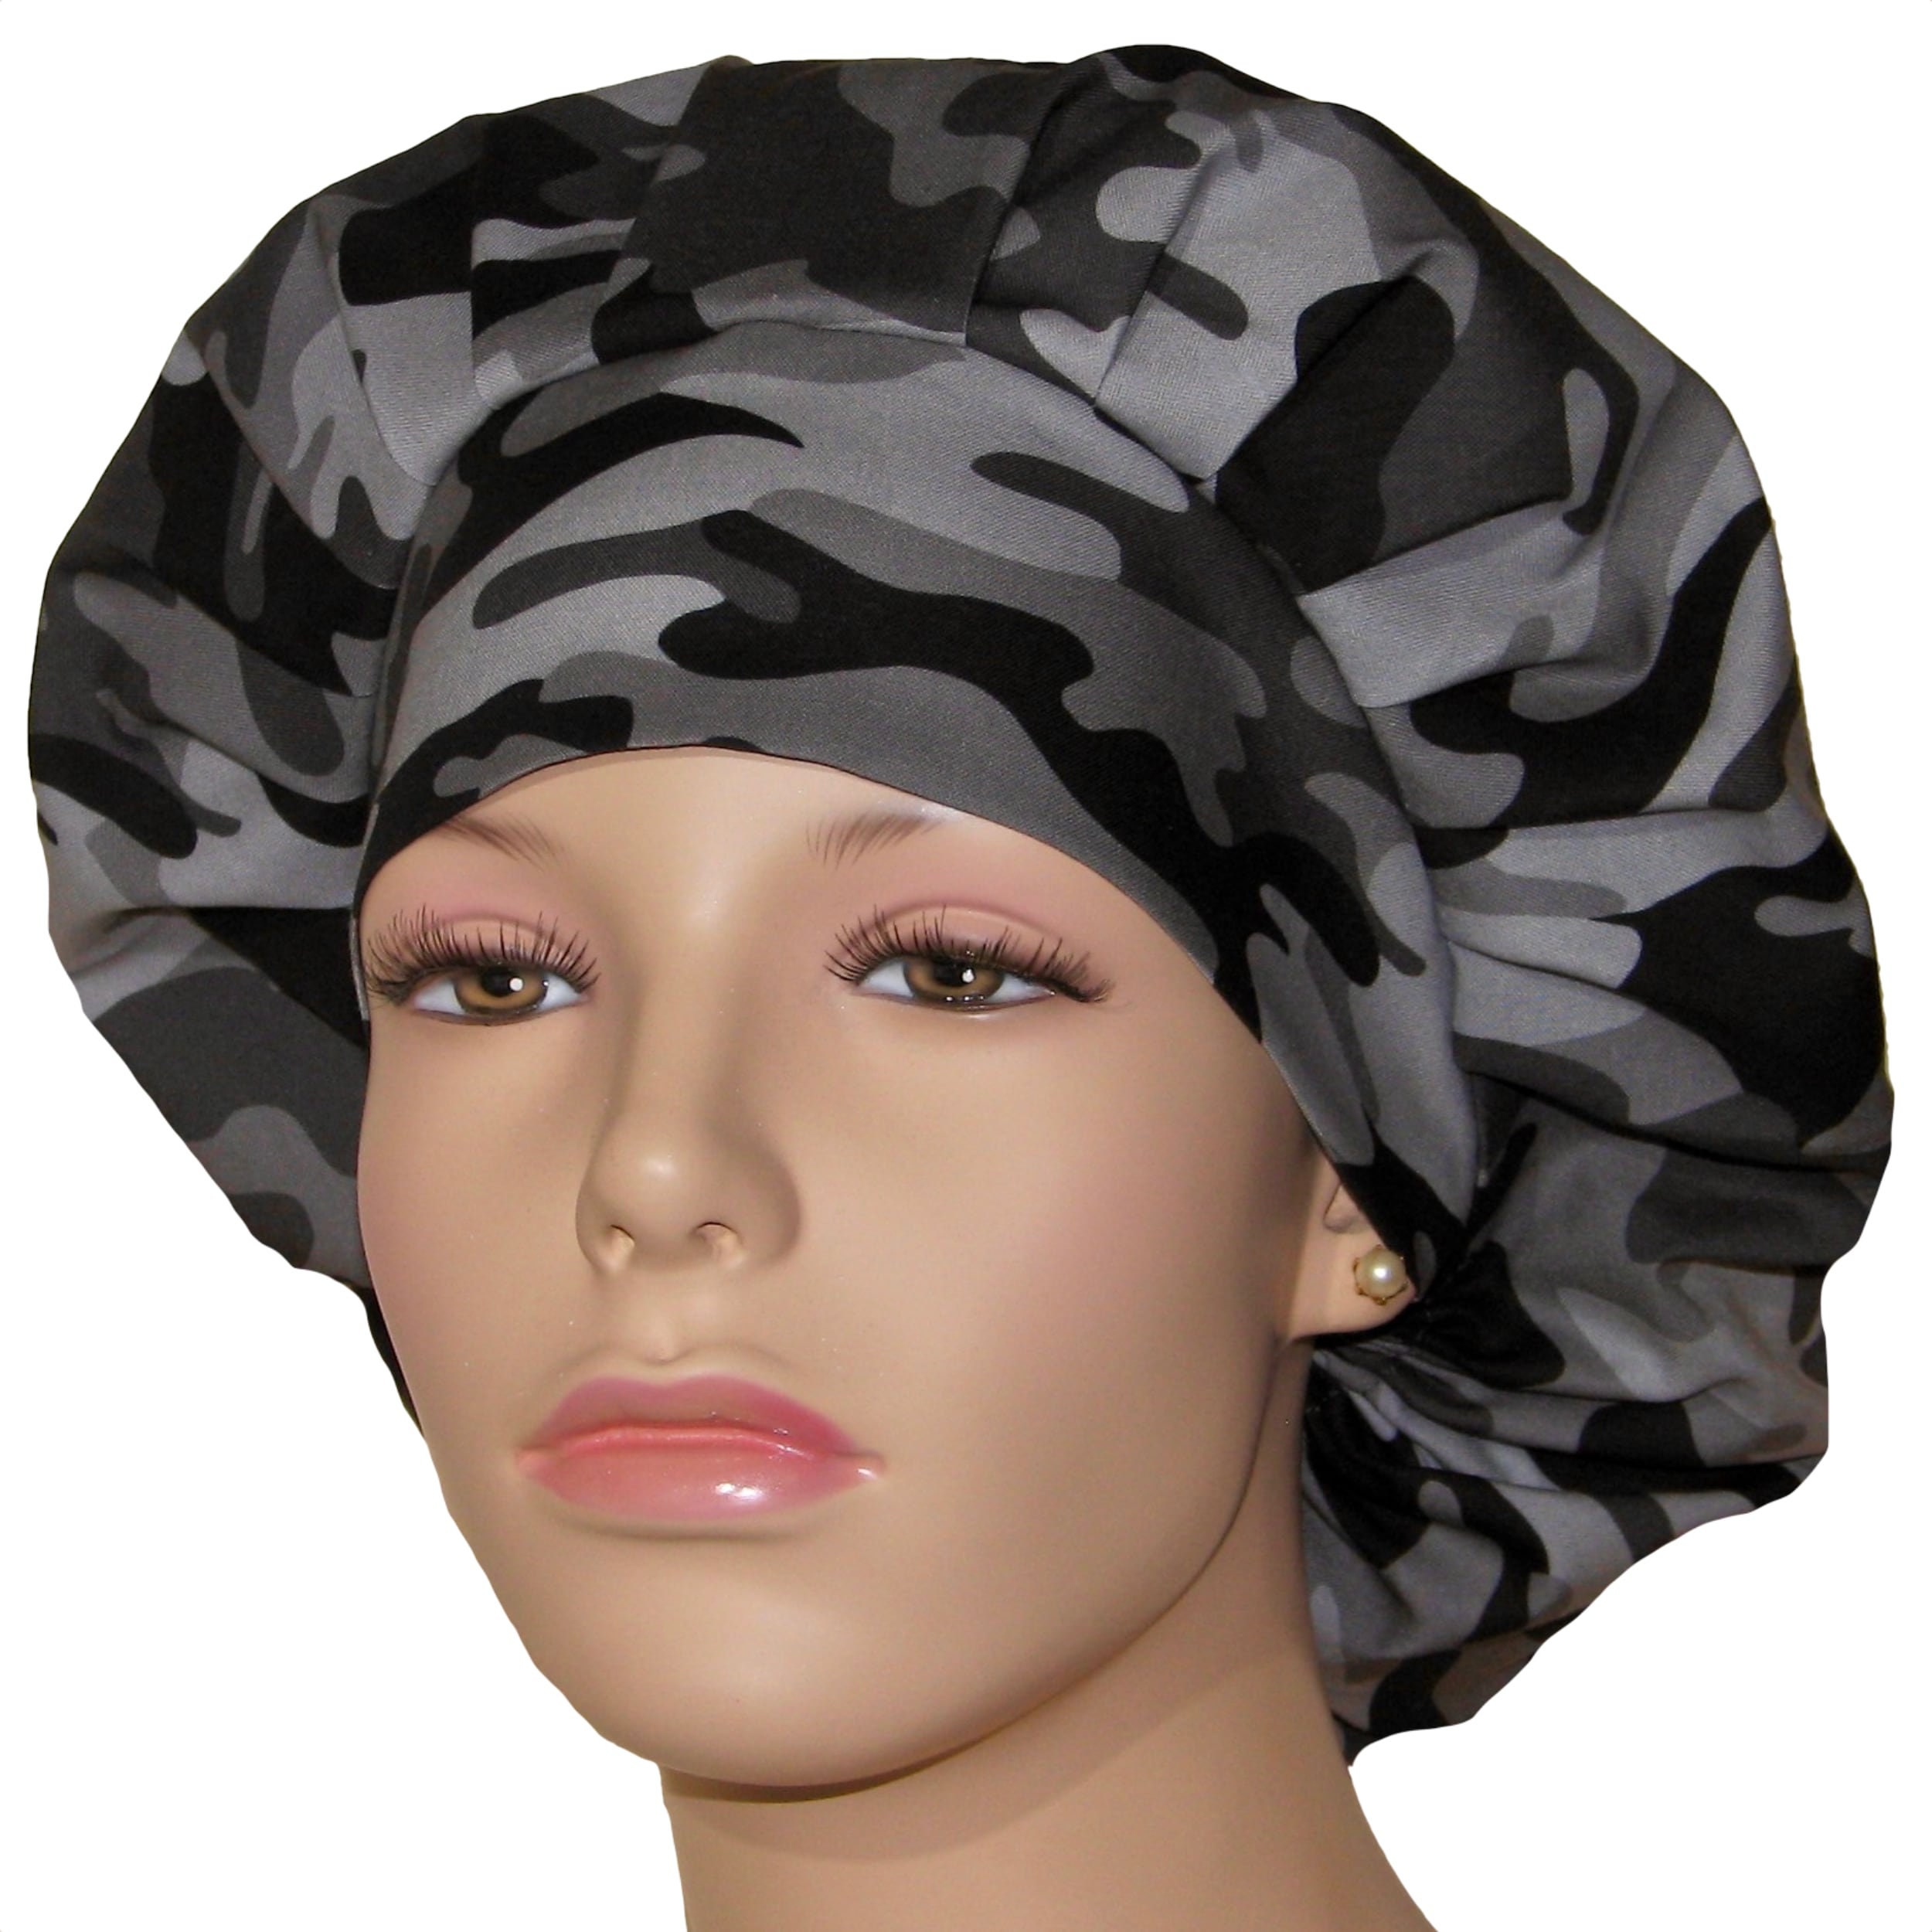 Scrub Bonnet for Women Solid Black Satin Lined or 100% Cotton